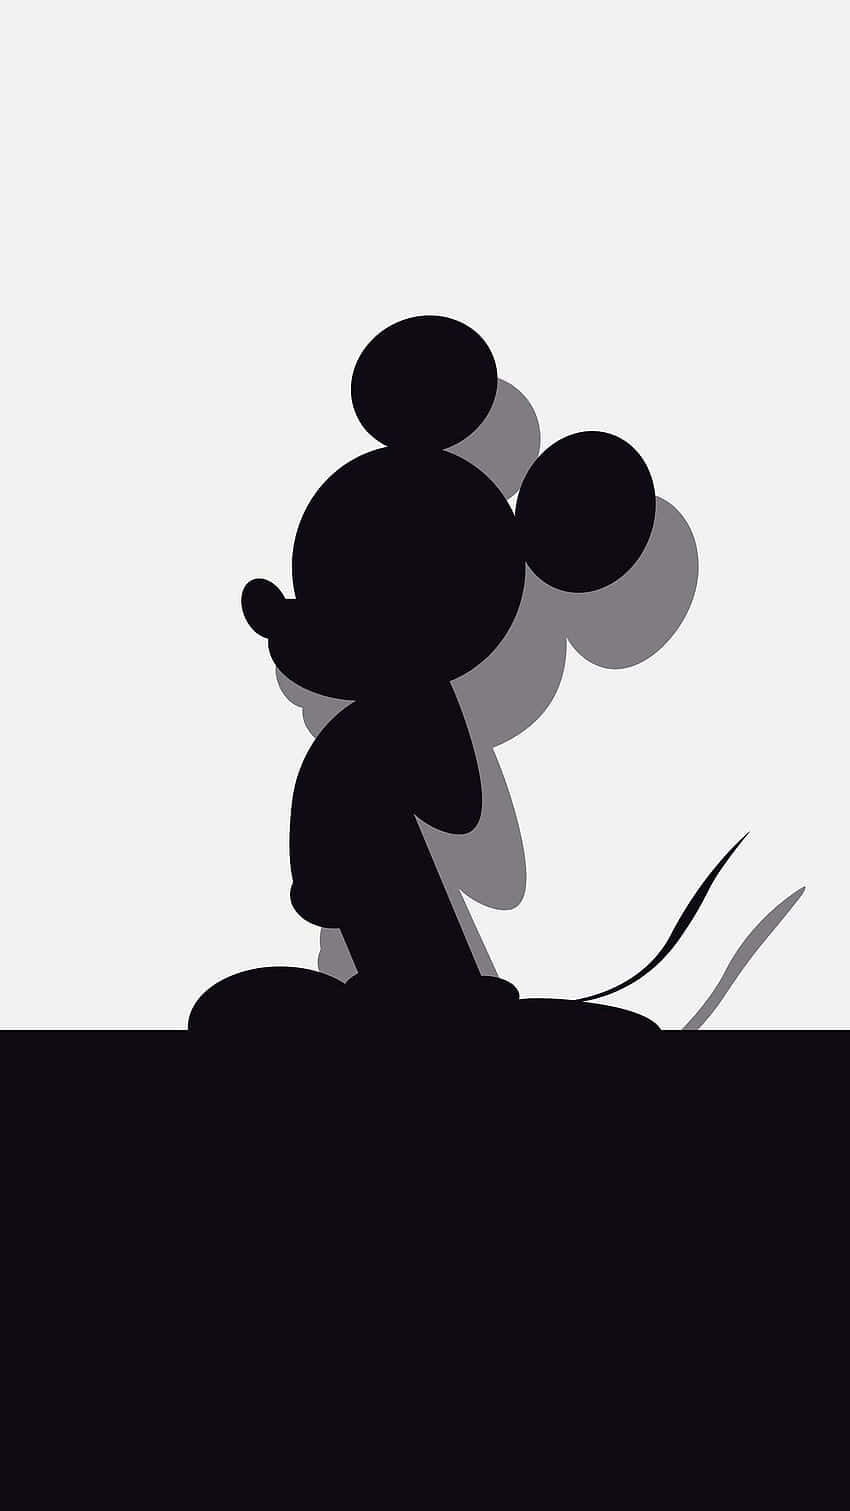 New Mickey Mouse Wallpaper  Wallpapers Of Mickey Mouse  Mickey mouse  wallpaper iphone Mickey mouse wallpaper Cute disney wallpaper